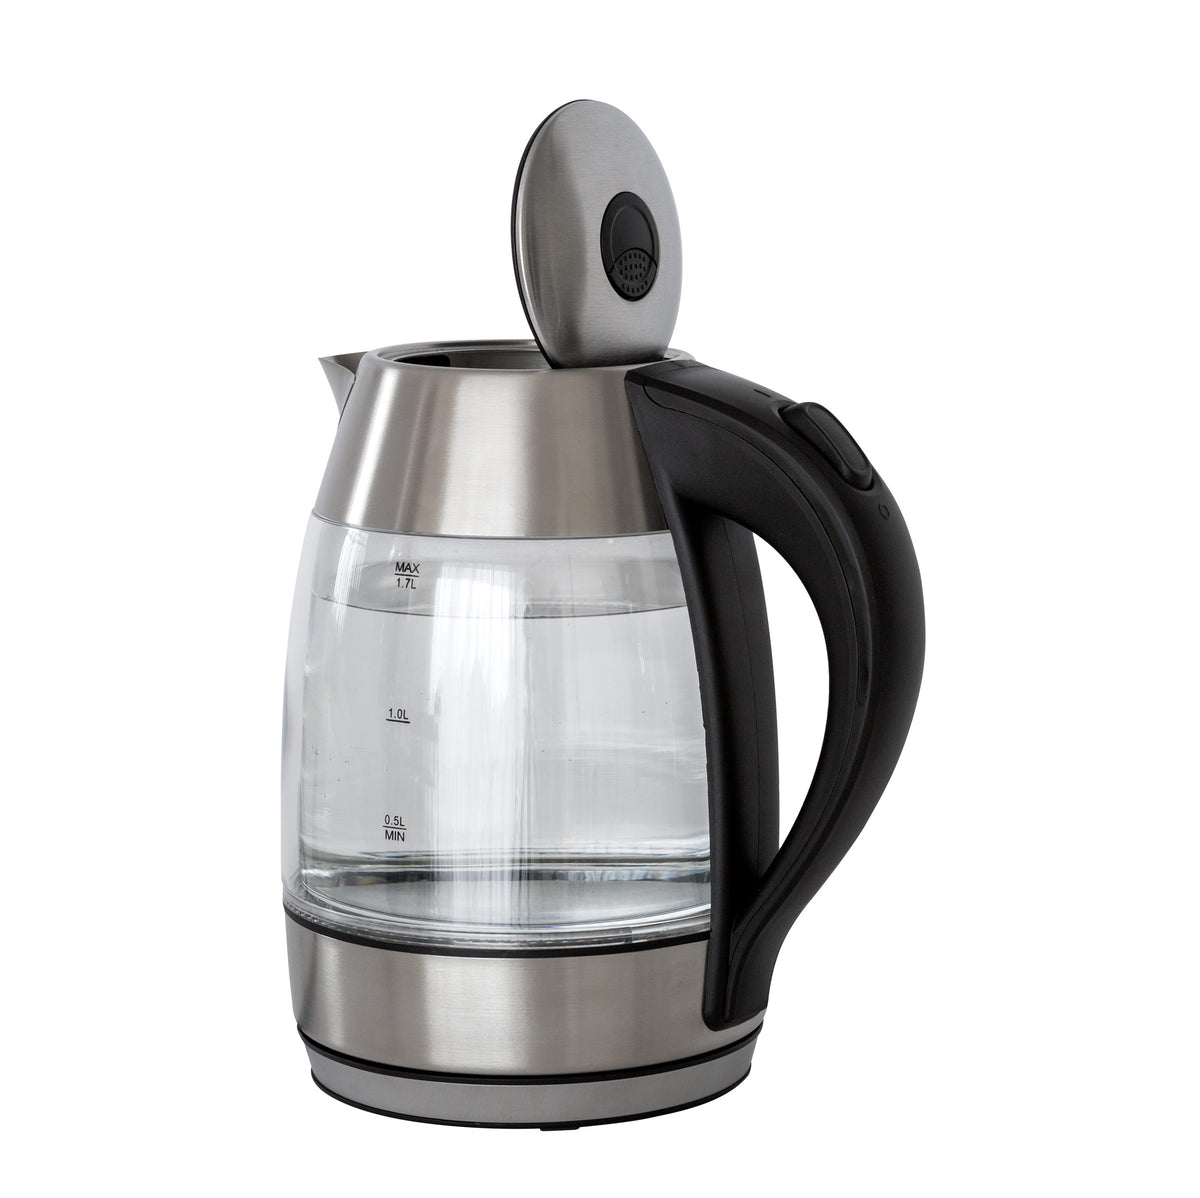 1.7L glass kettle with the lid open.